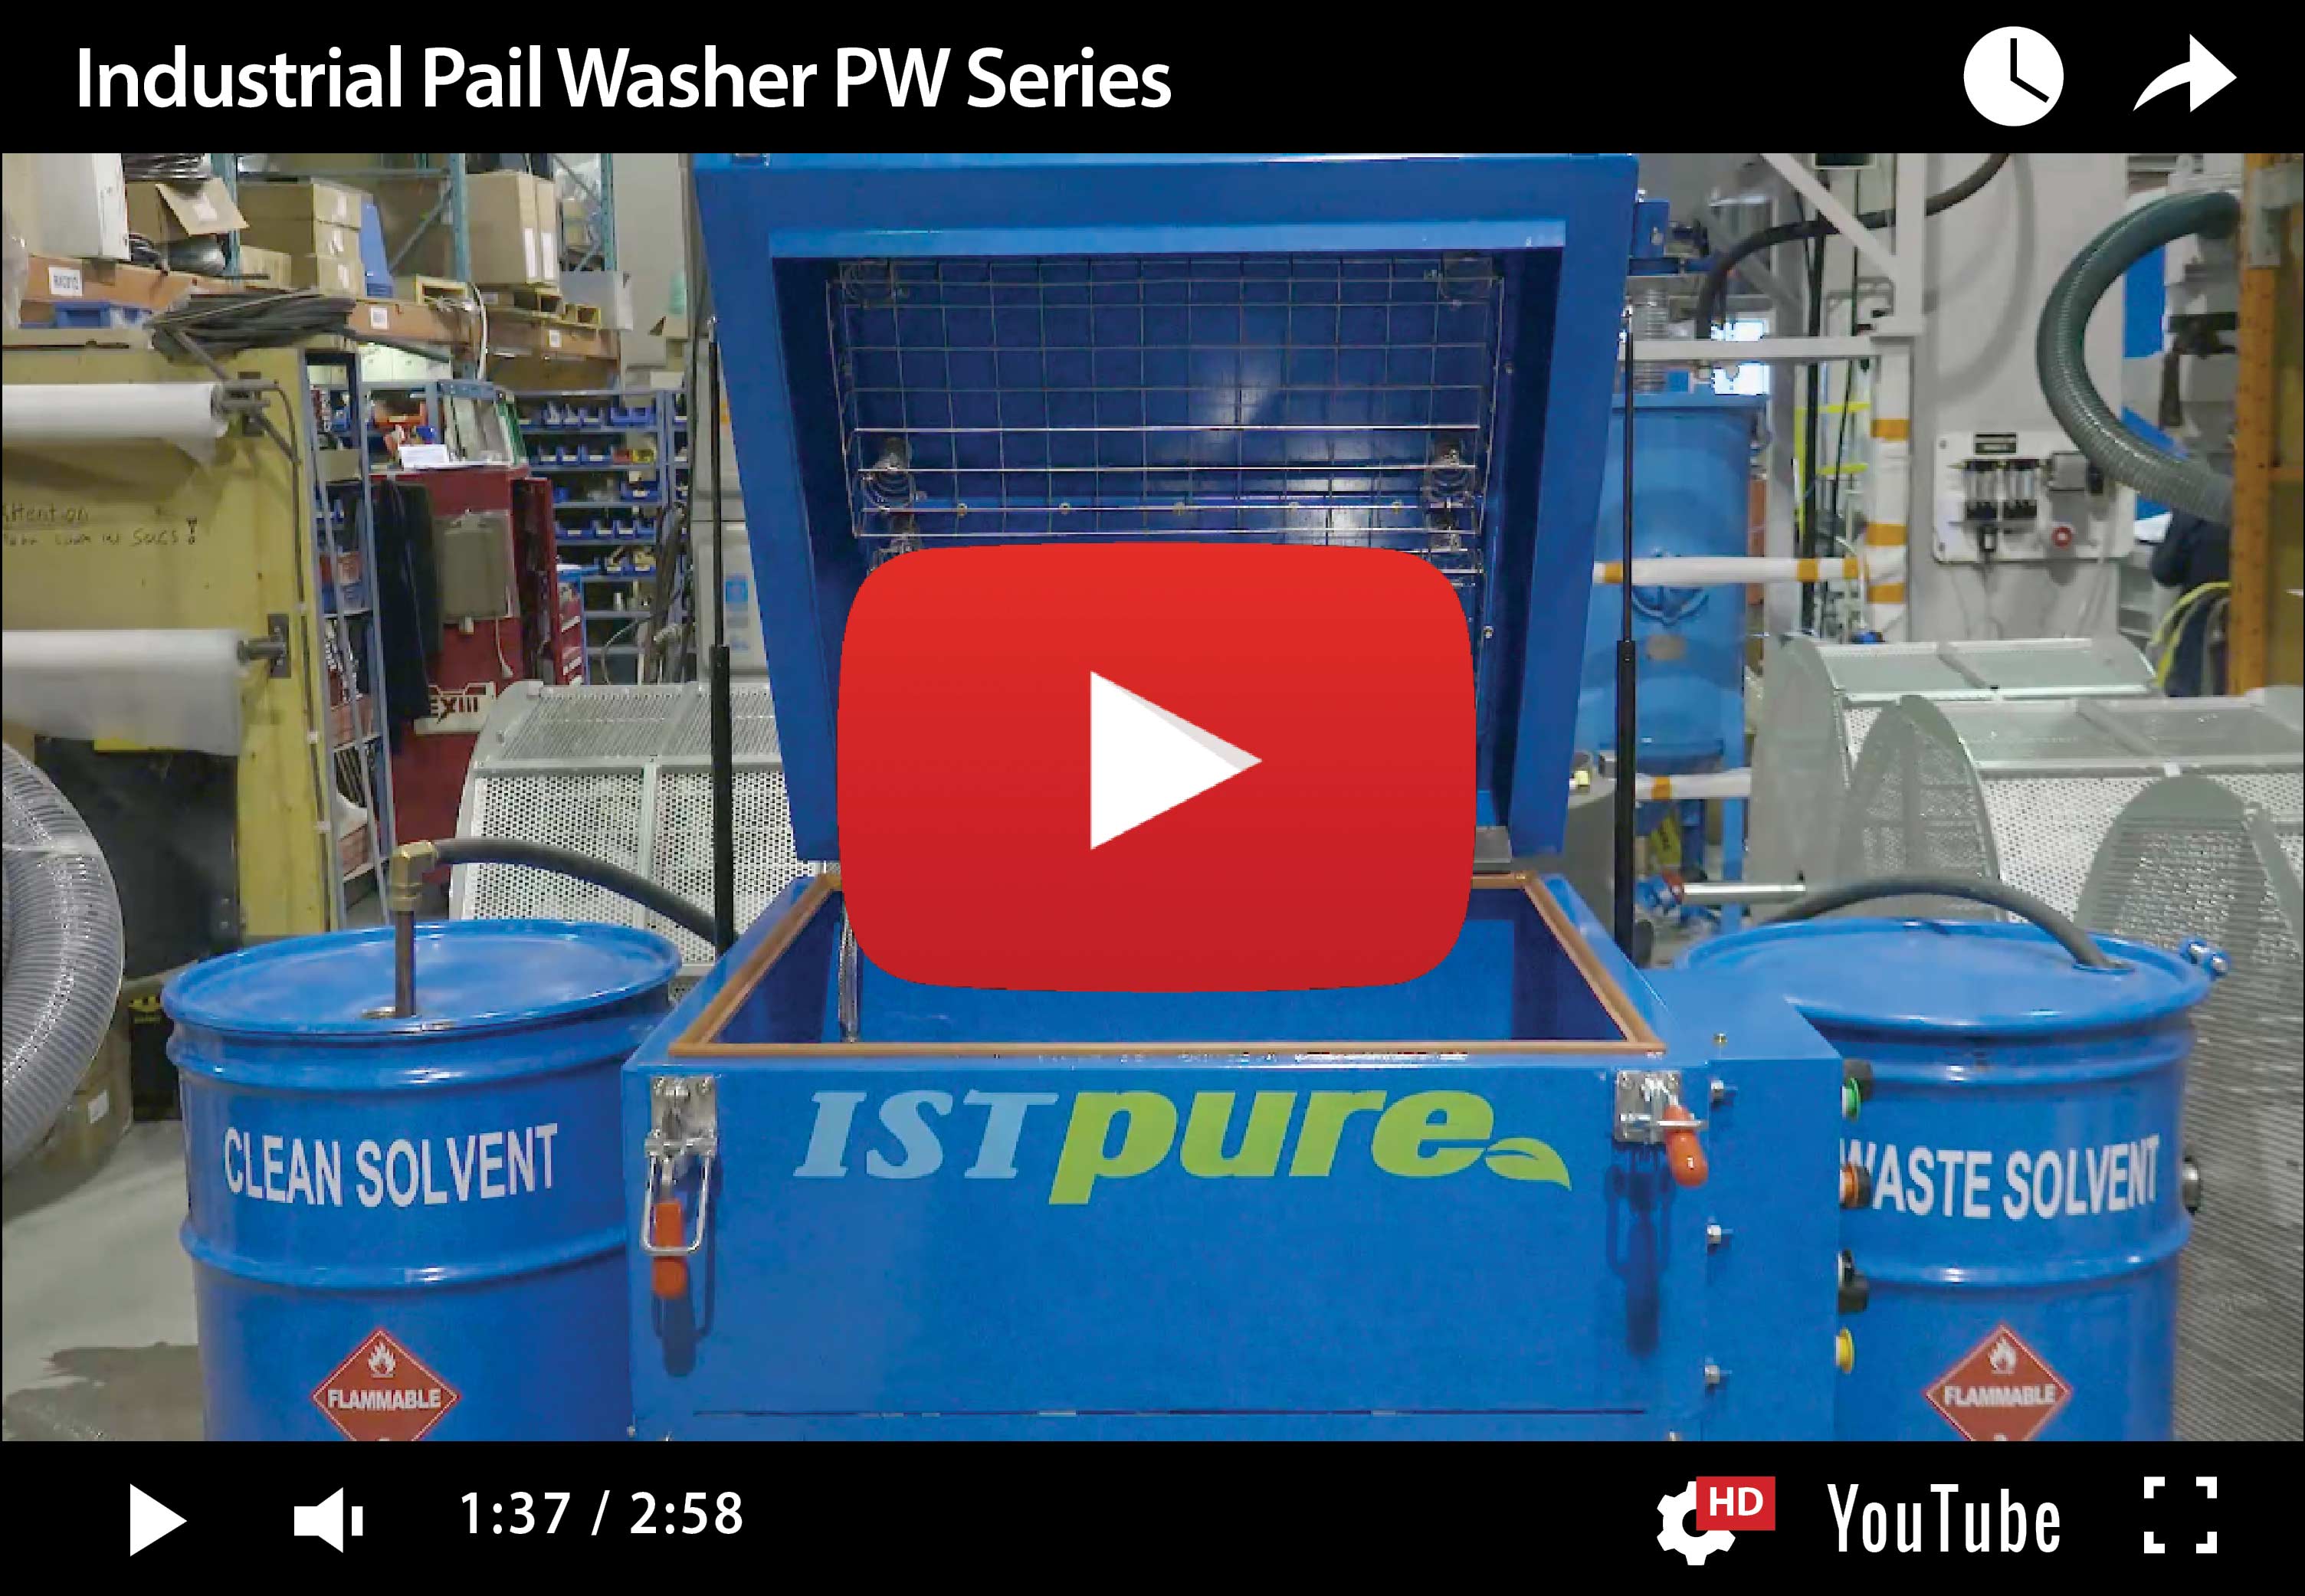 PW Series – Solvent Pail Washer